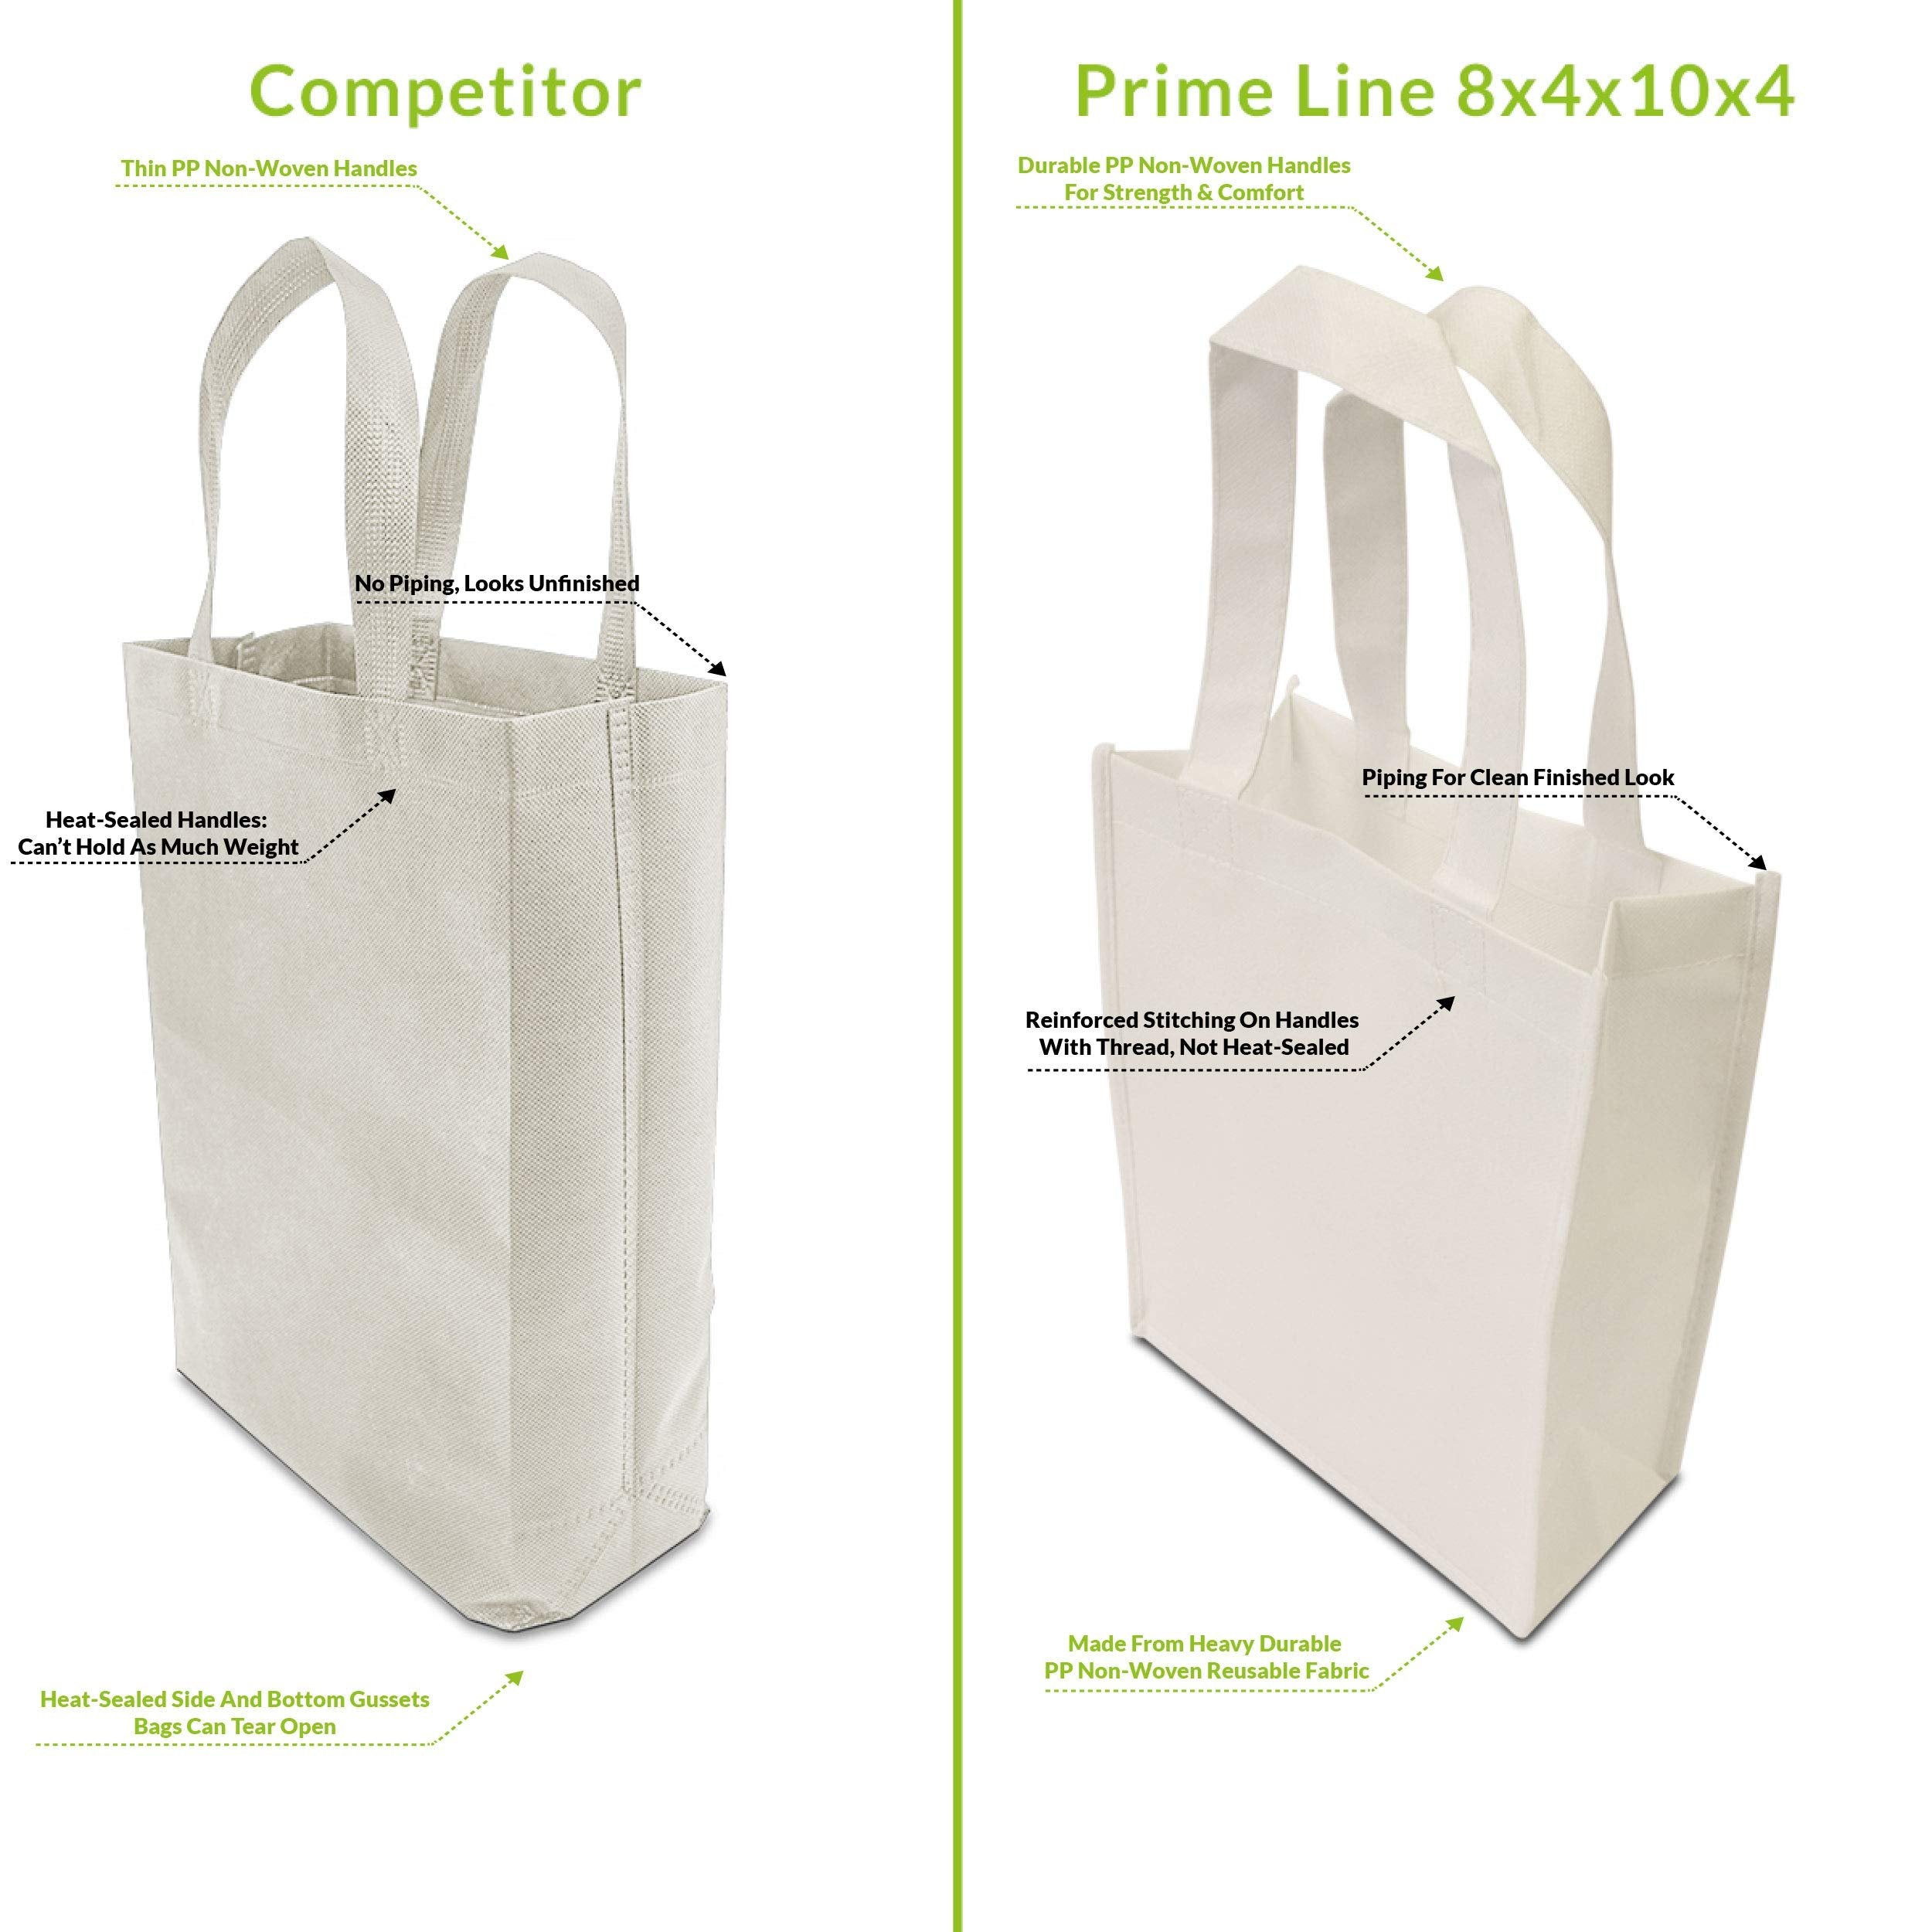 12 Reusable White Wedding Gift Shopping Bags w/ Handles - 8x4x10 Inch Size